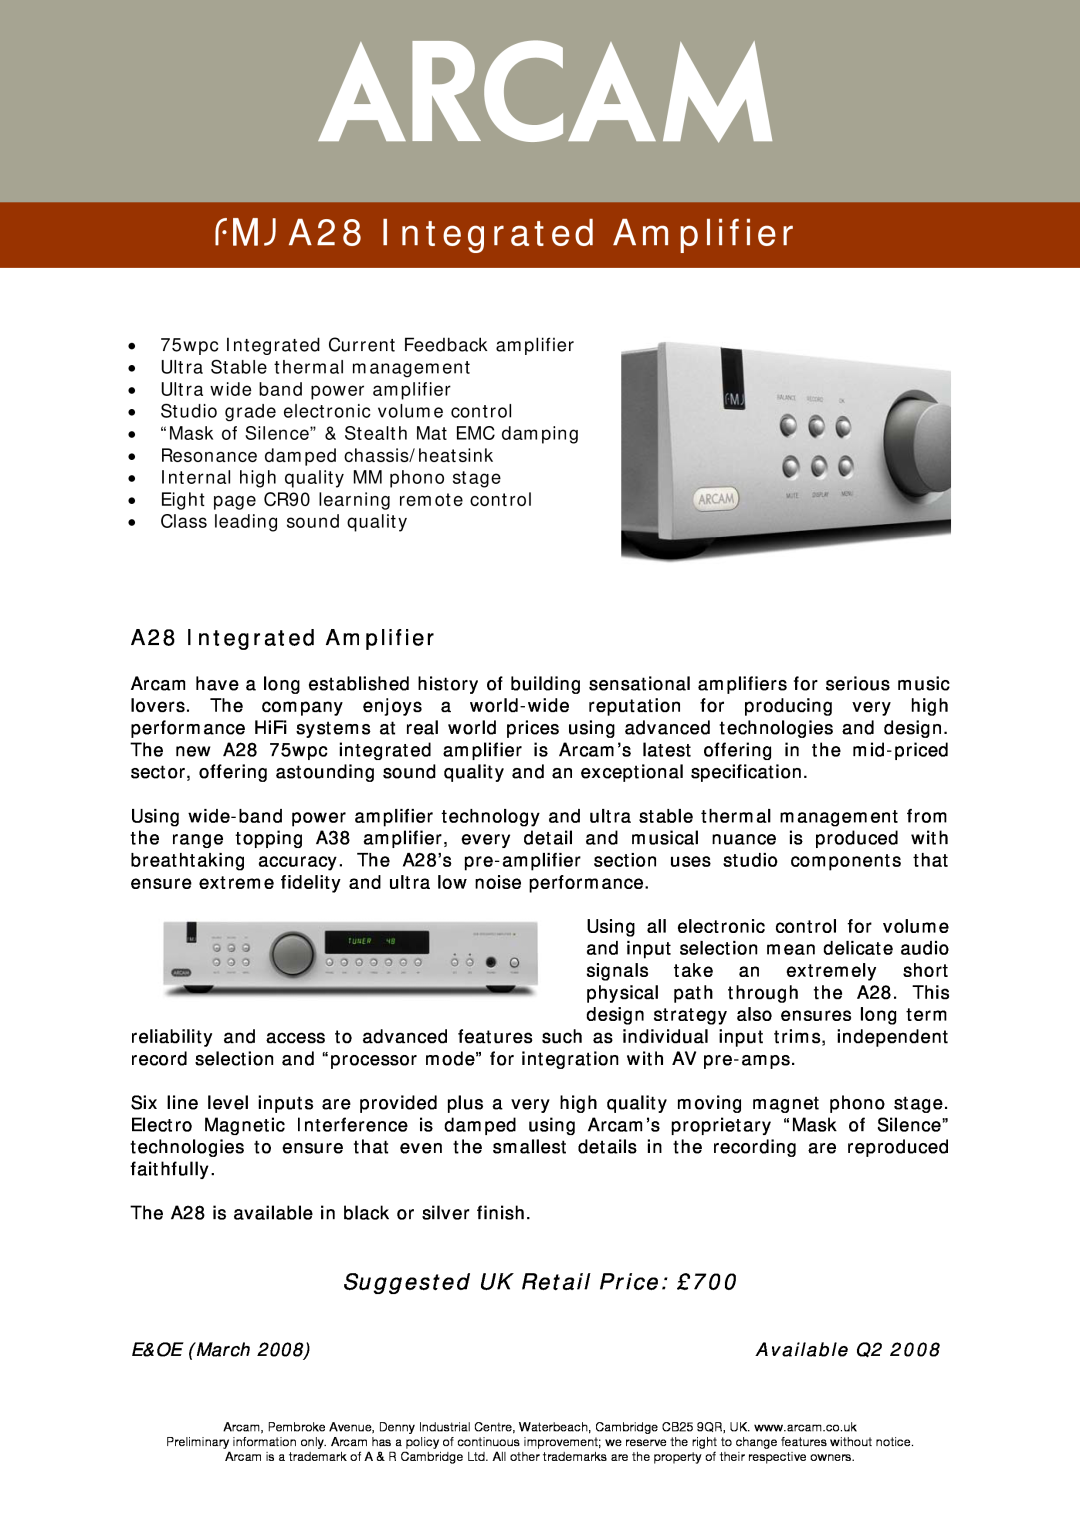 Arcam manual 23425, fA28 Integrated Amplifier, New product information DV139 DVD player, E&OE March, Available Q2 